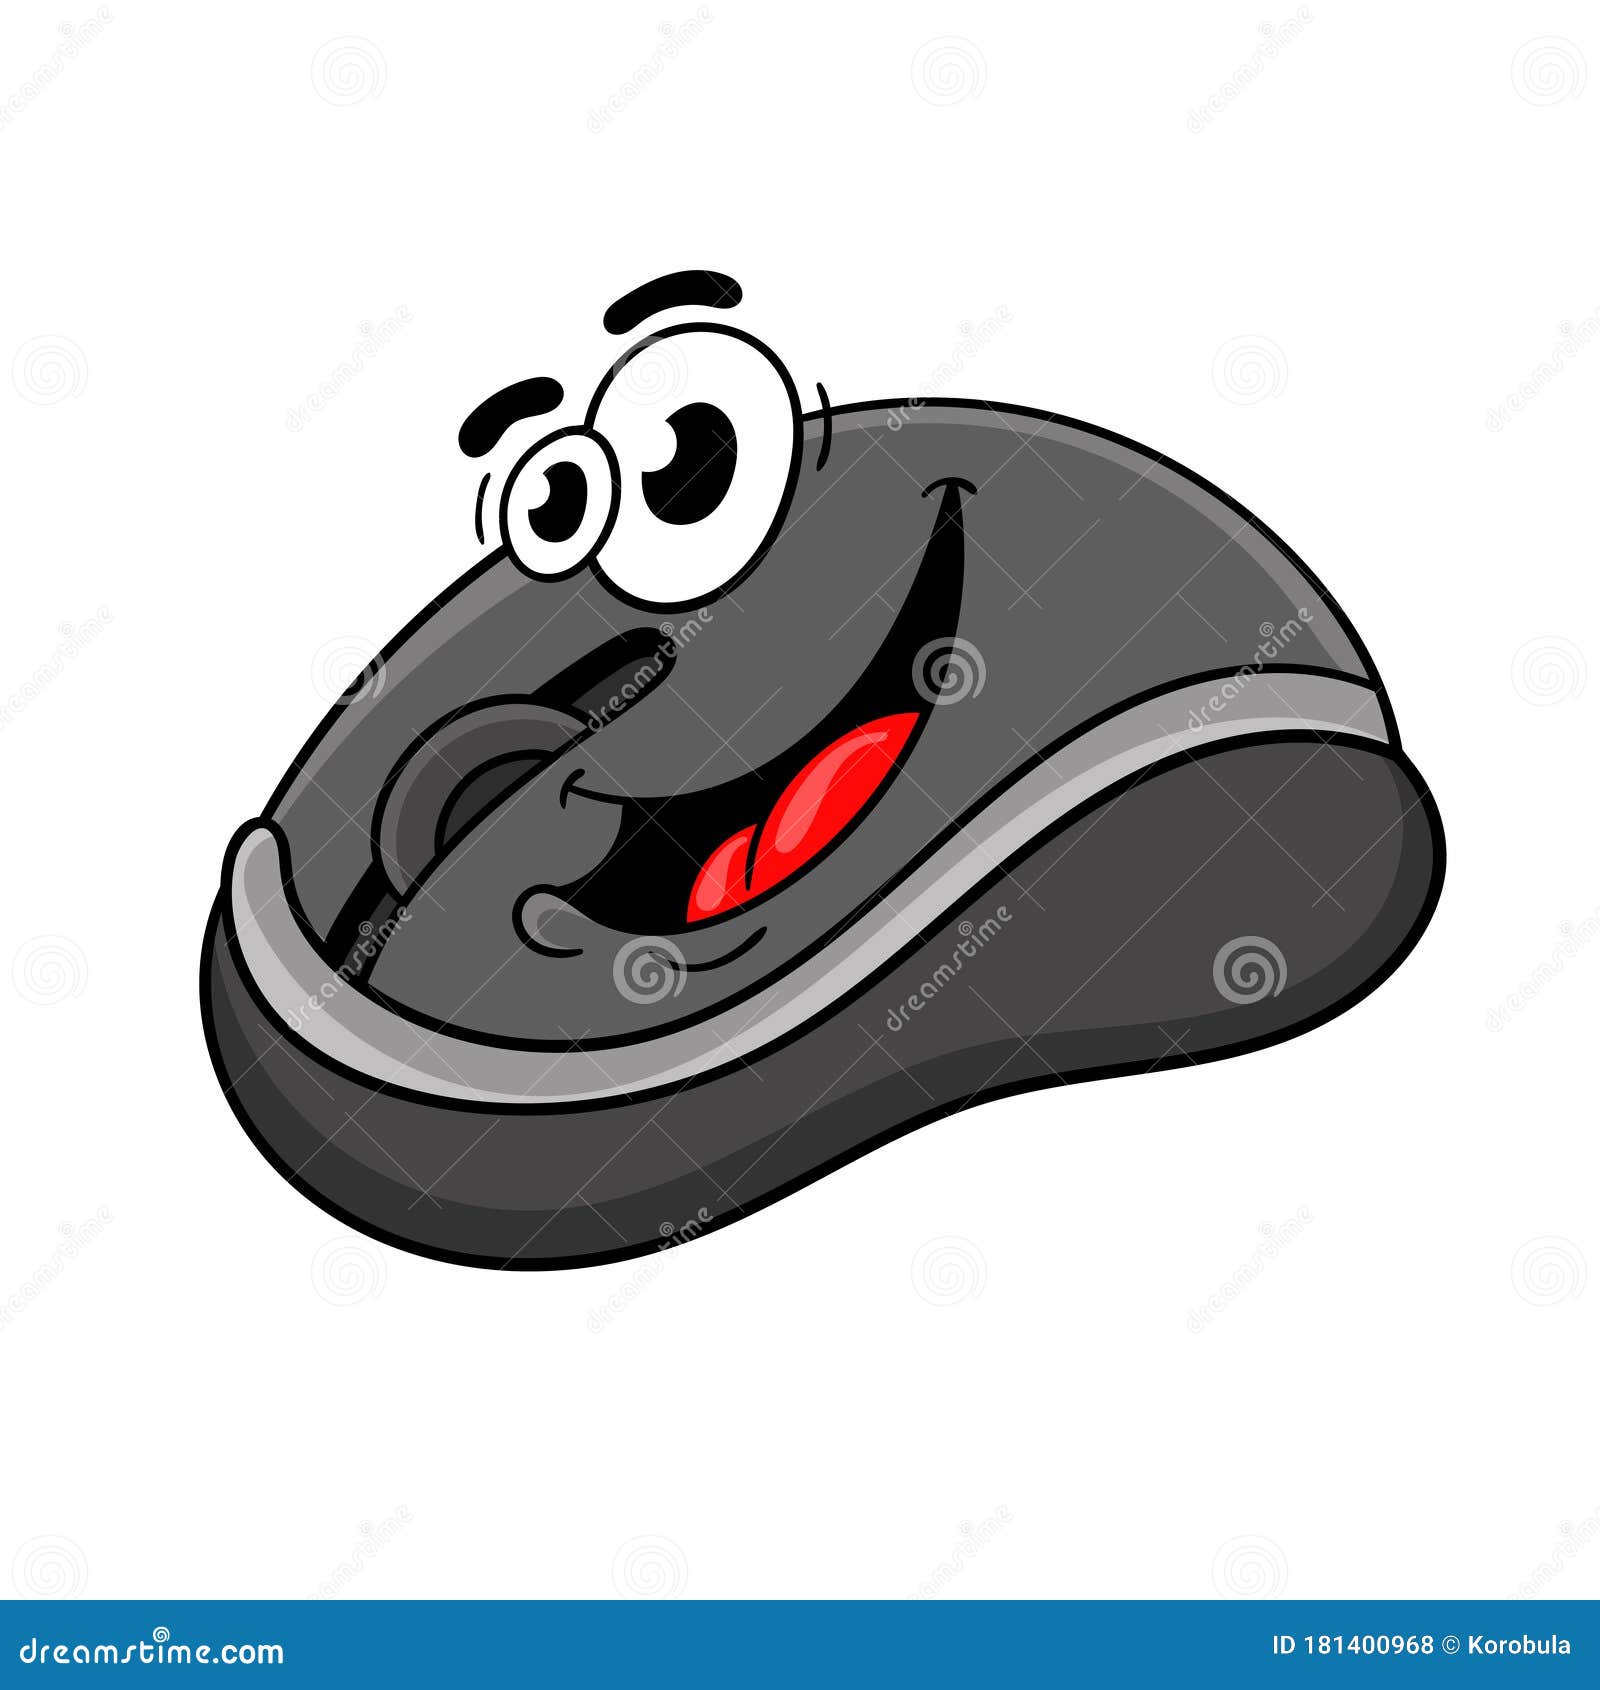 Funny Cartoon Computer Mouse Character Design. Vector Illustration Stock  Vector - Illustration of cartoon, style: 181400968